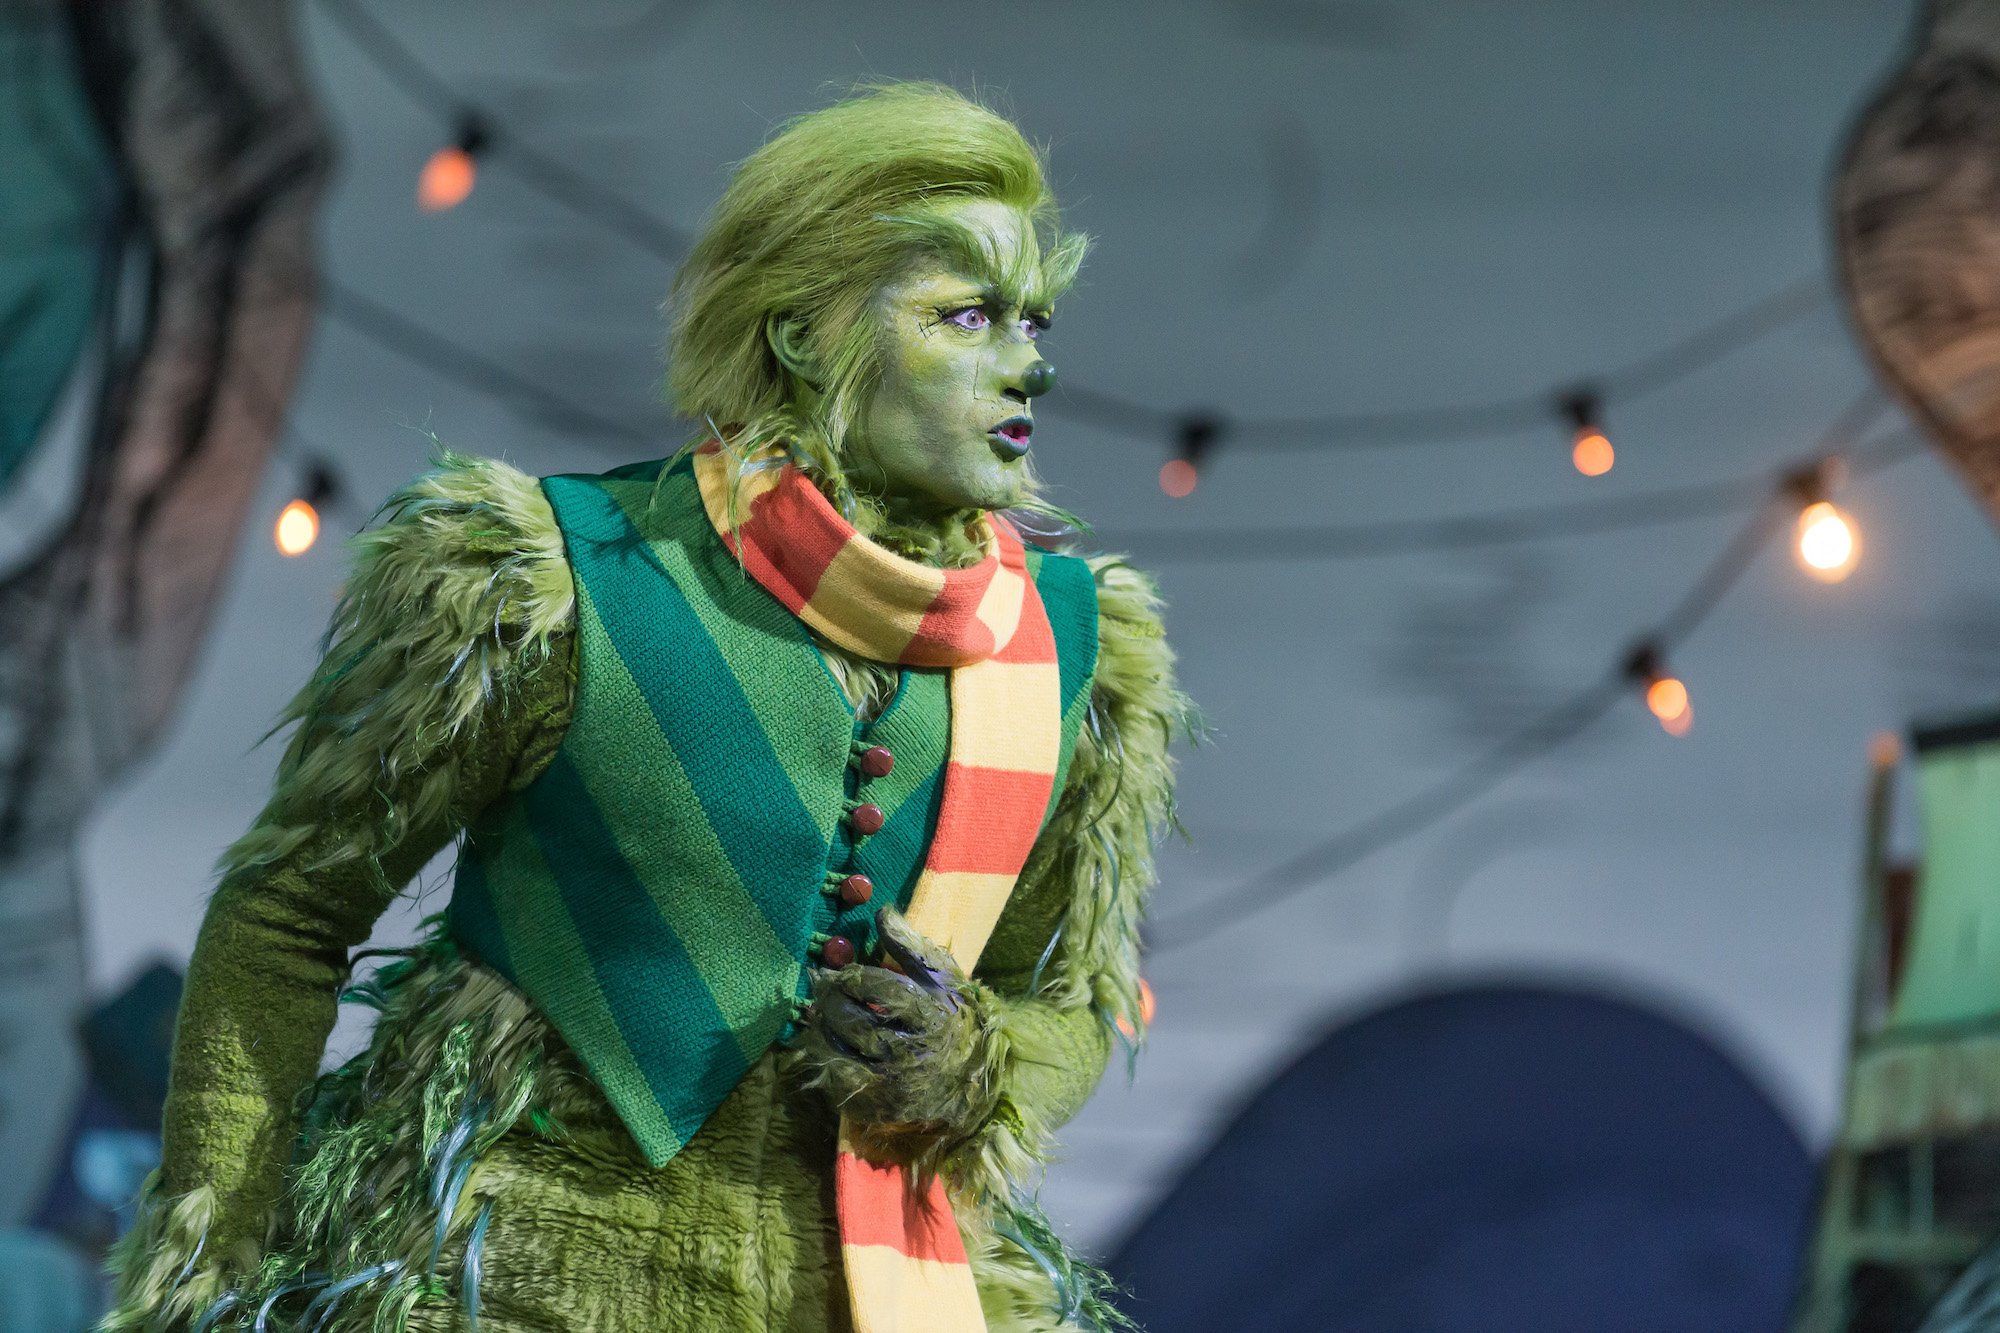 Matthew Morrison as The Grinch in 'DR. SUESS' THE GRINCH MUSICAL' on NBC